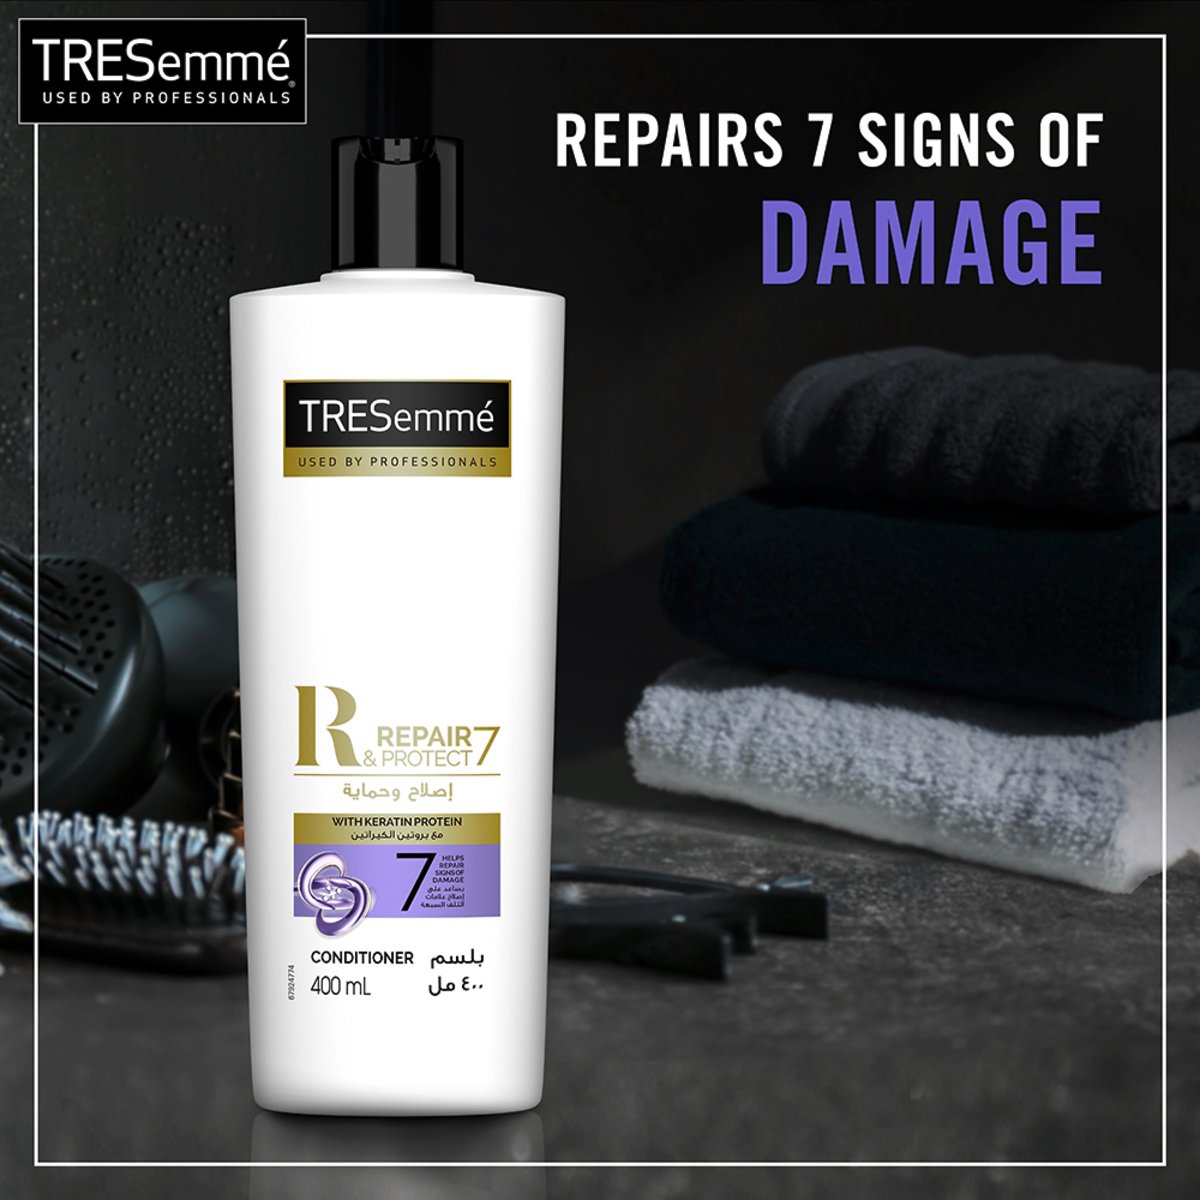 TRESemme Repair & Protect Conditioner with Biotin for Dry & Damaged Hair 400 ml